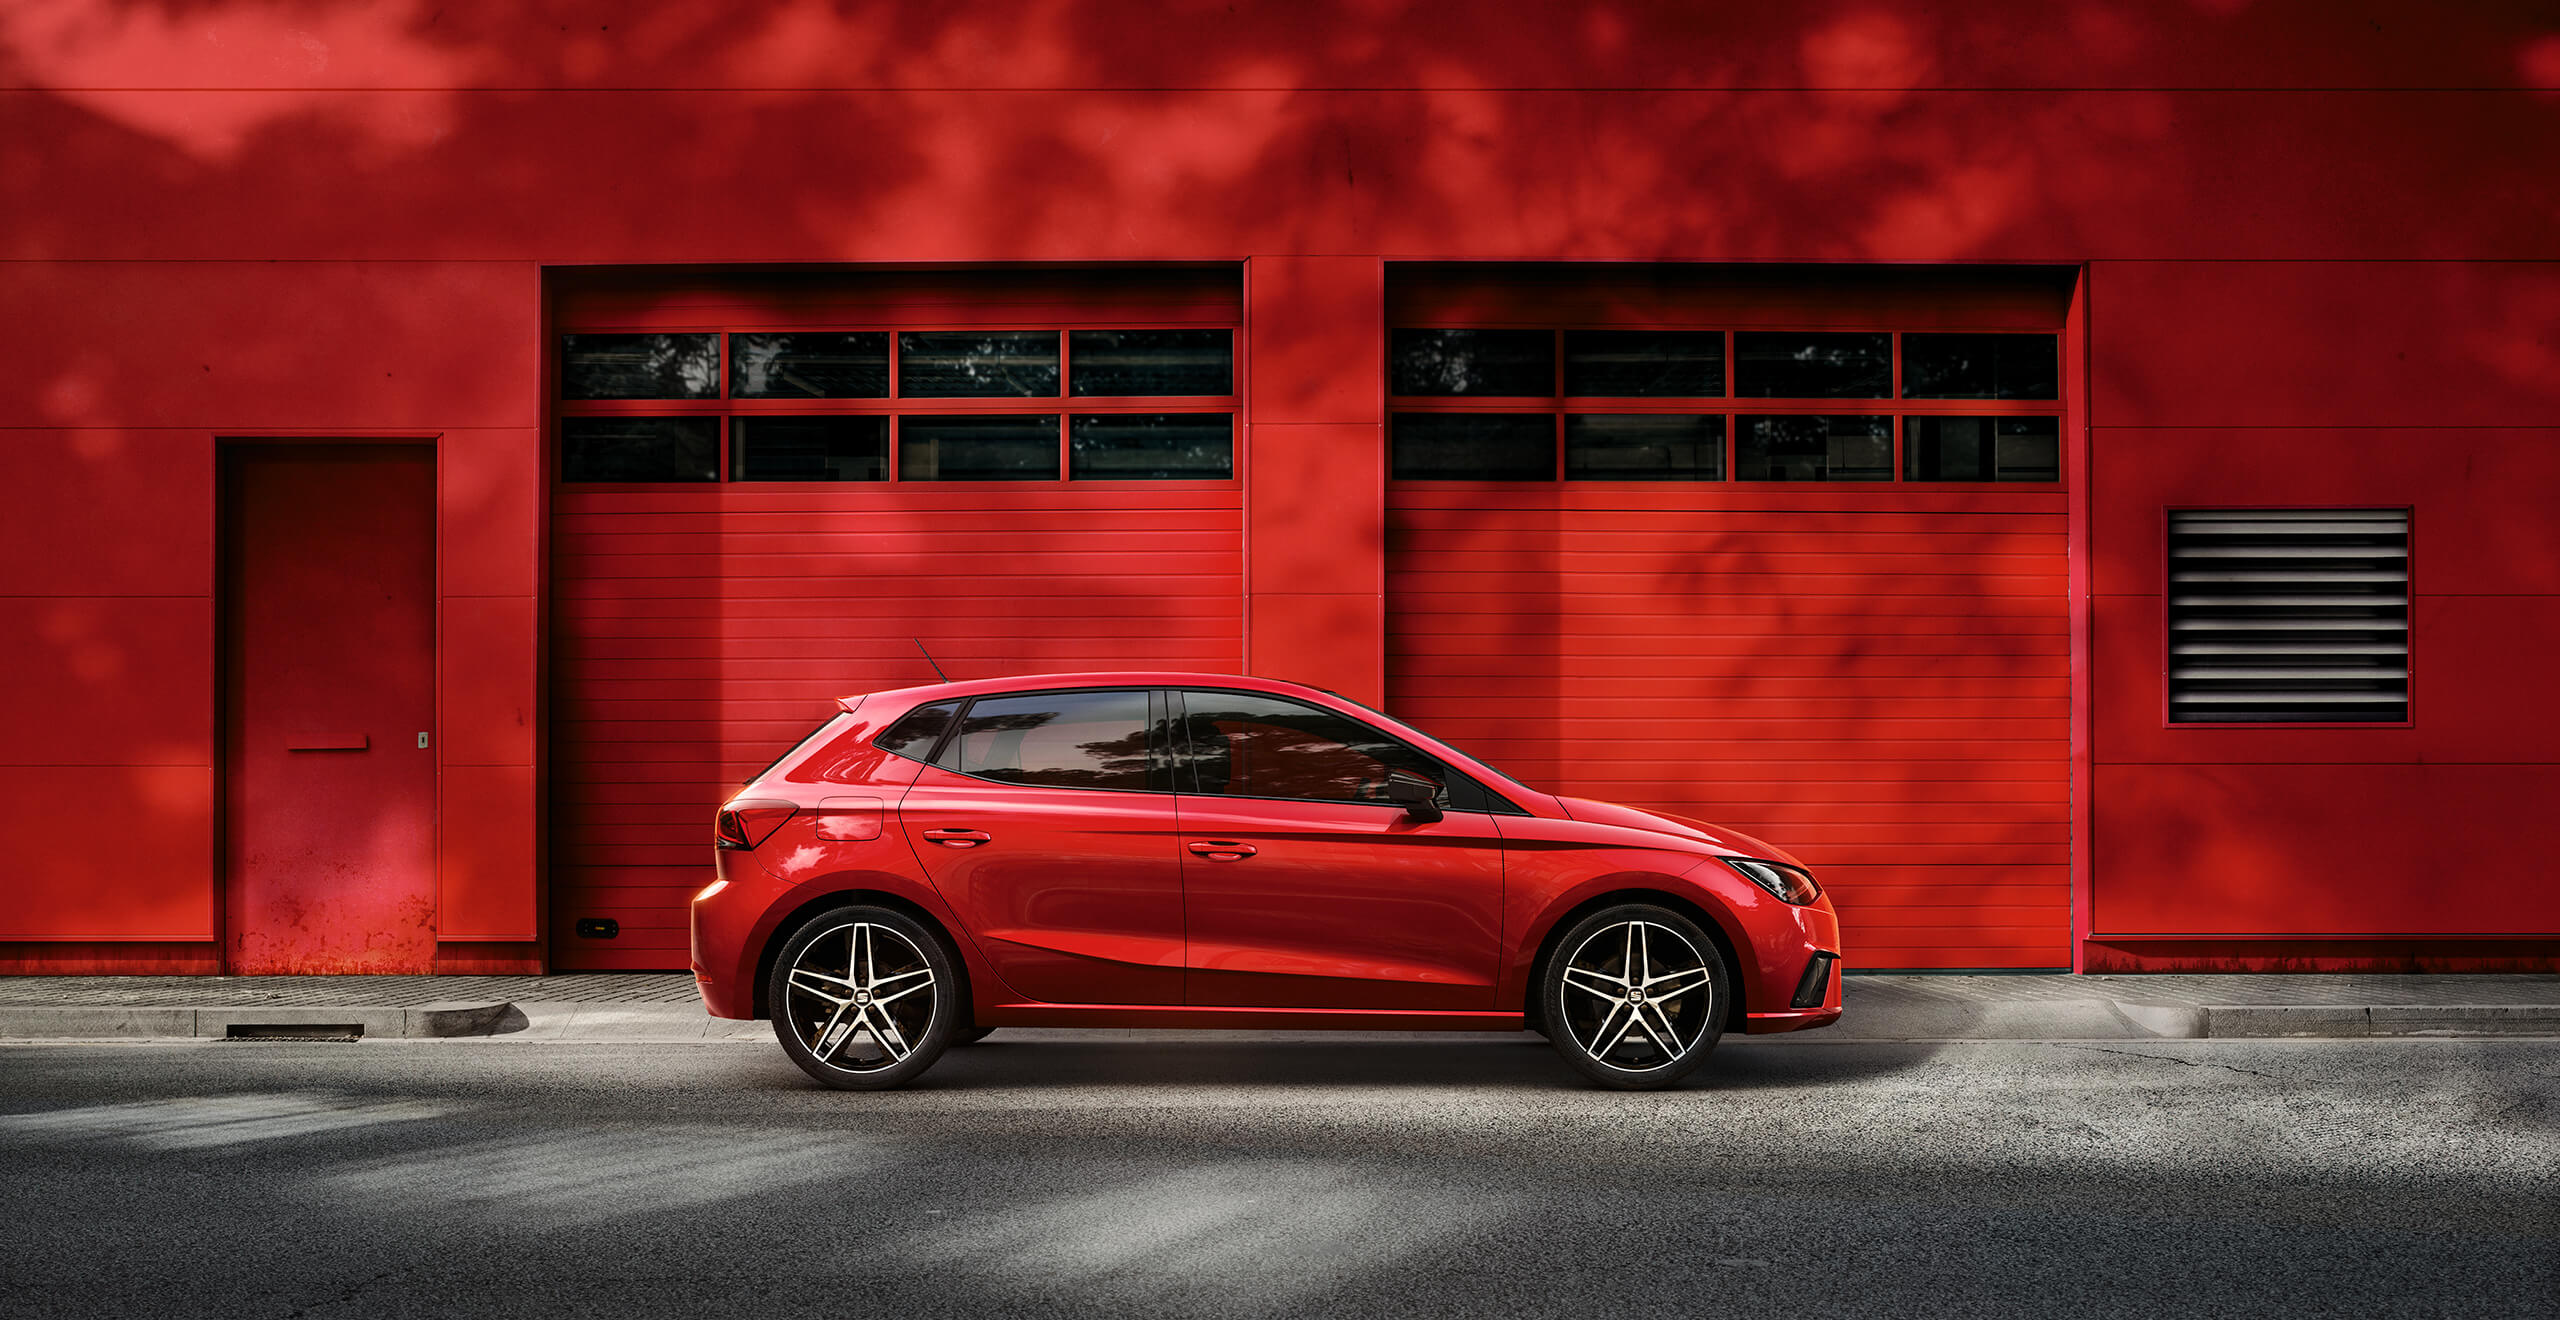 SEAT new car services maintenance independent garages – Red SEAT Ibiza city car hatchback parked in front of a red garage wall